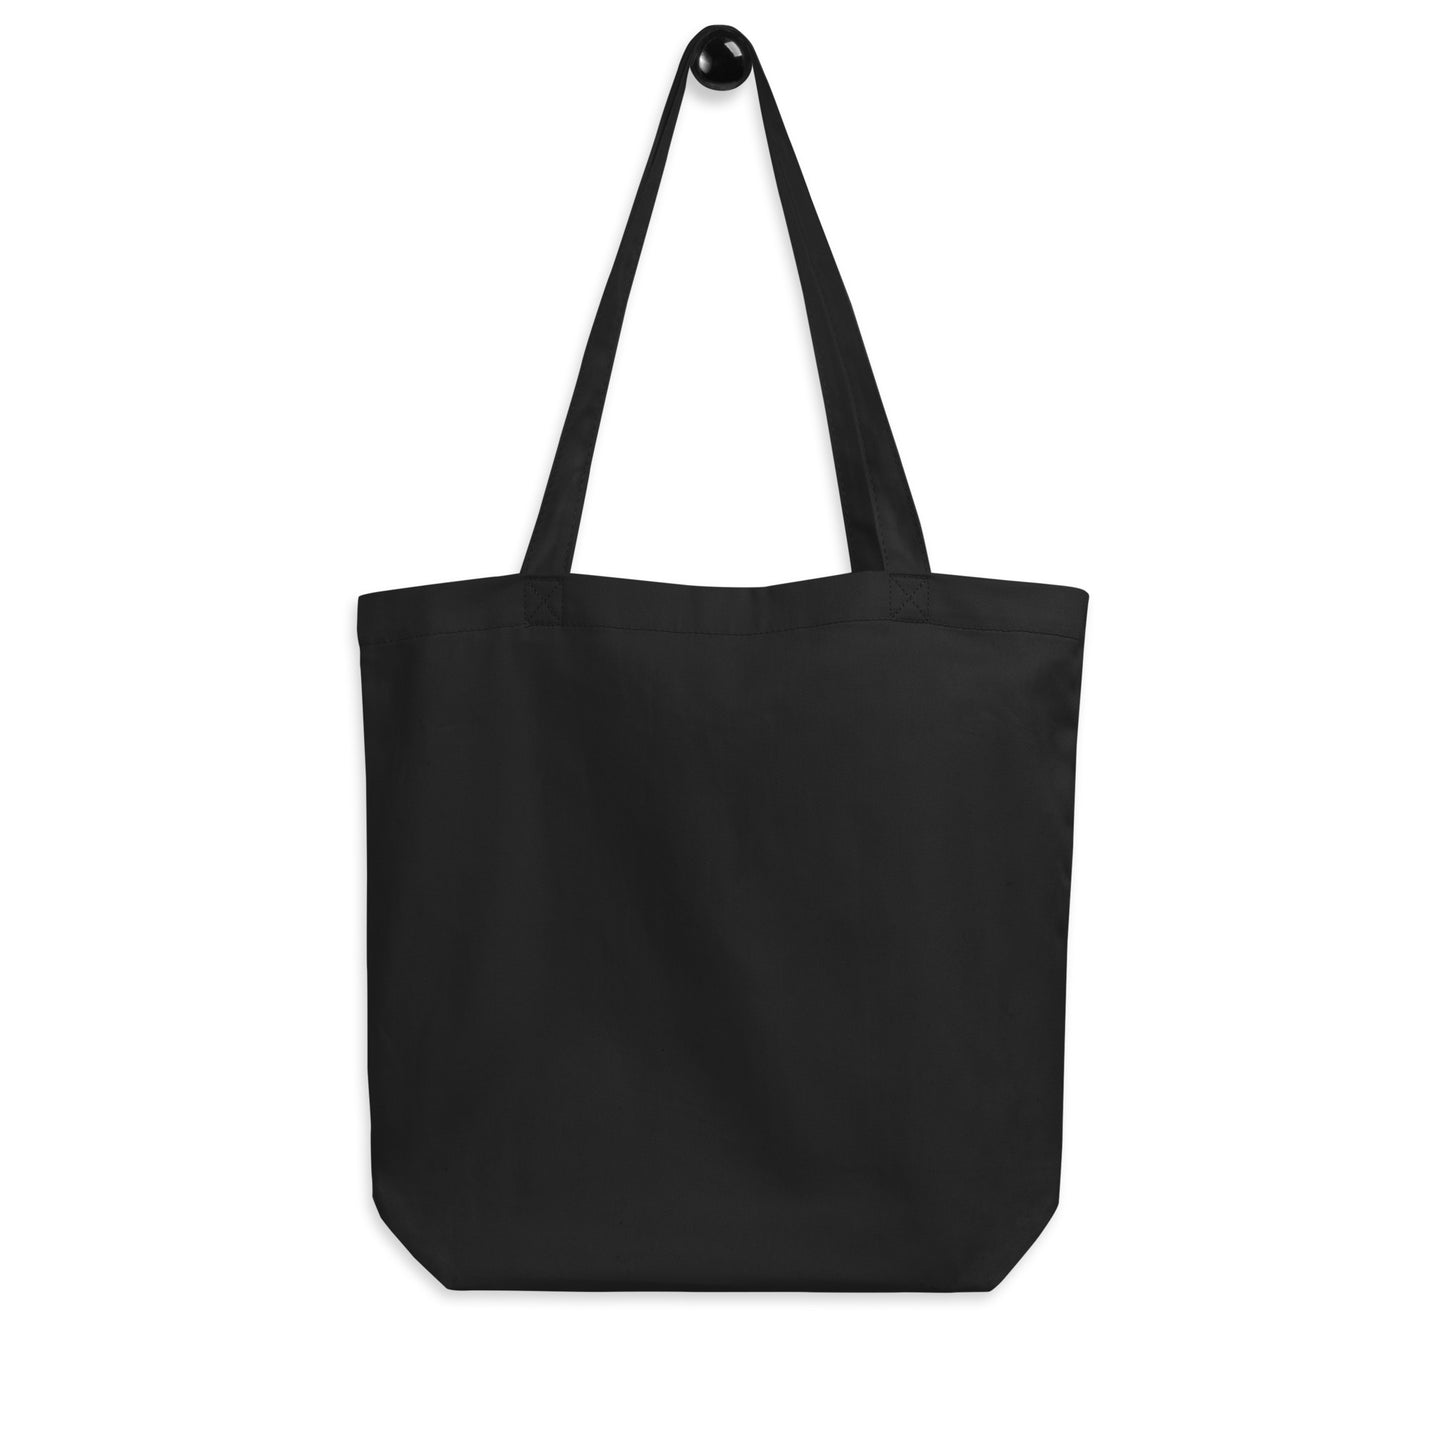 Unique Travel Gift Organic Tote - White Oval • YYT St. John's • YHM Designs - Image 05